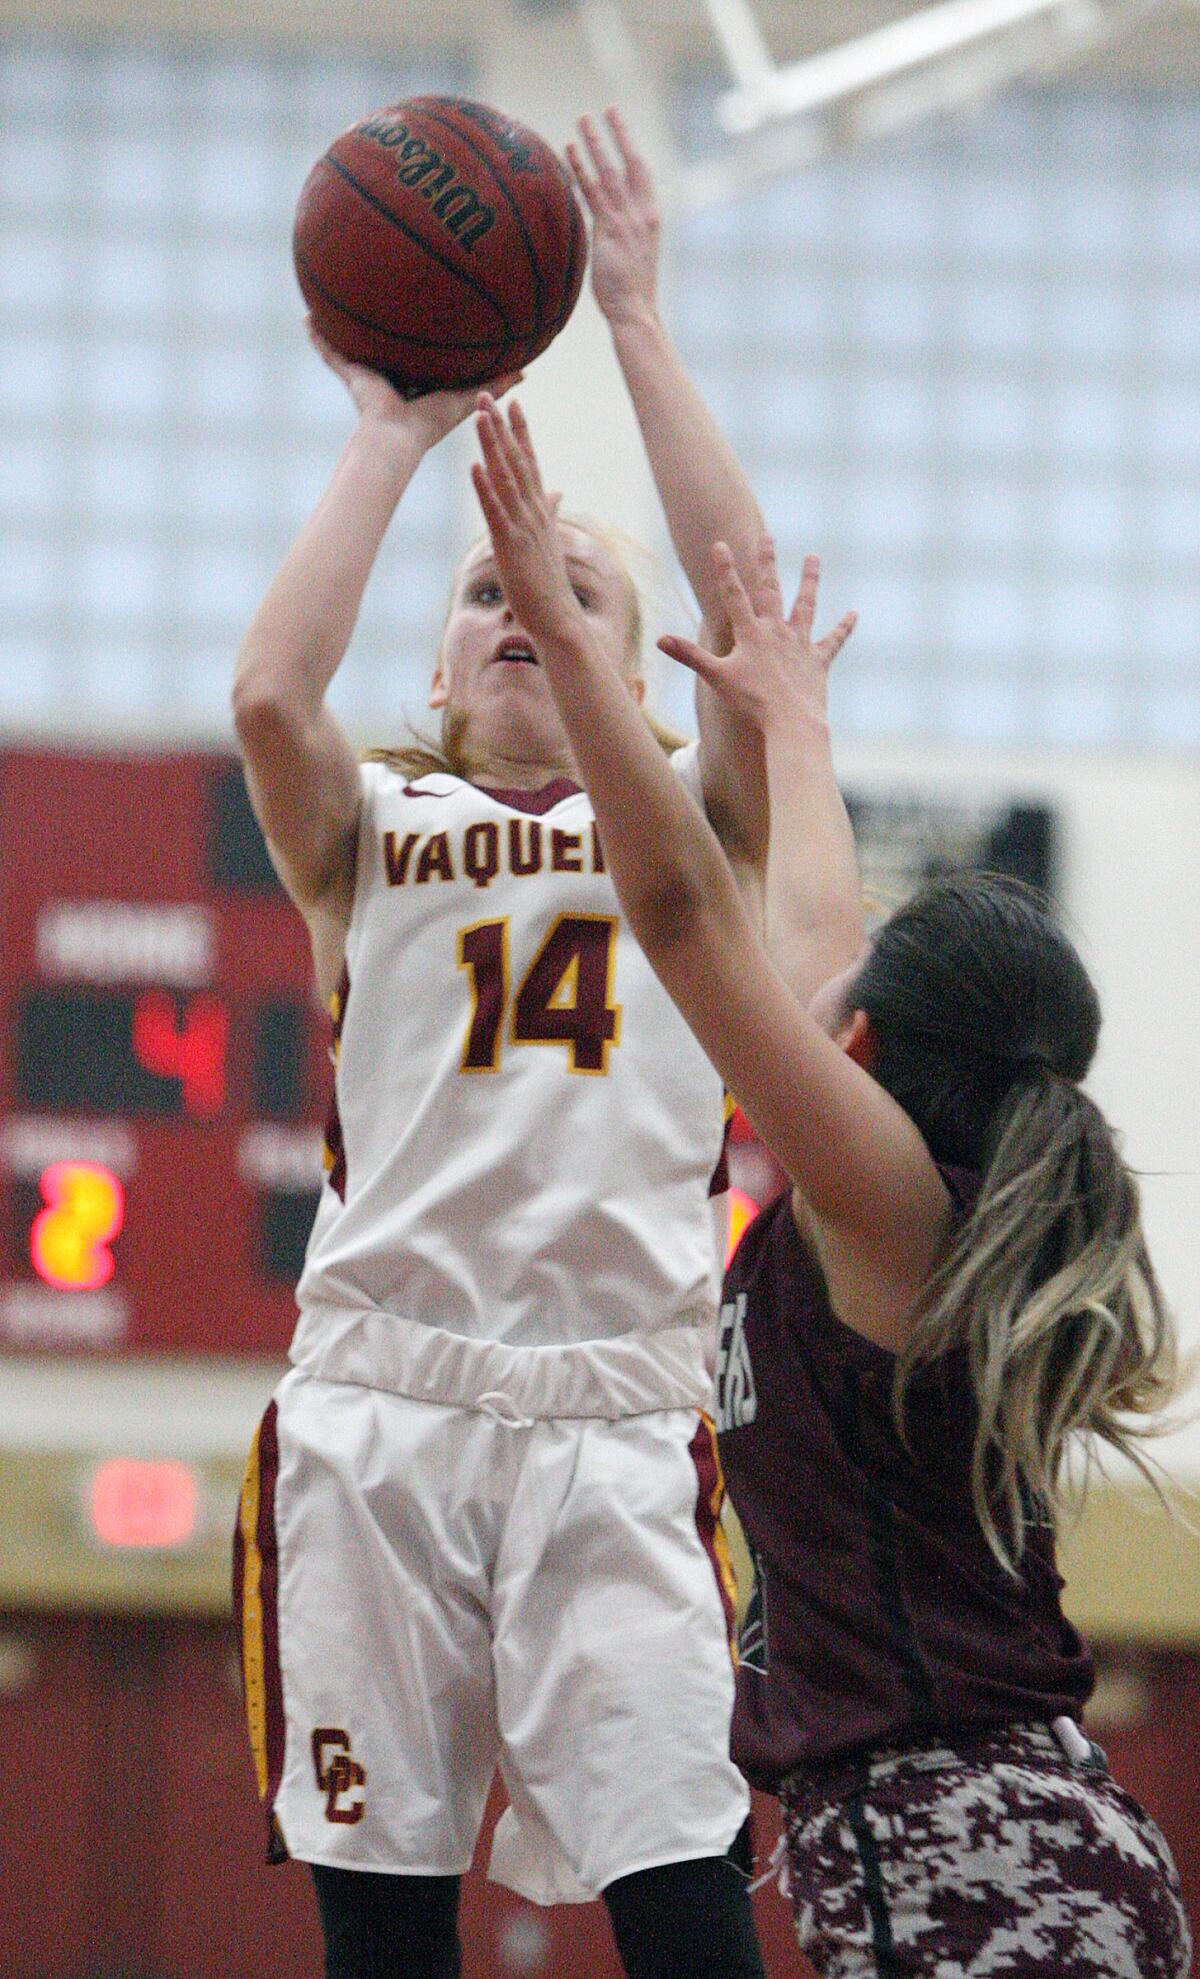 Glendale Community College's Tess Oakley-Stilson sets up for a shot against in a Western State Conference women's basketball game at Glendale Community College on Wednesday, January 22, 2020.